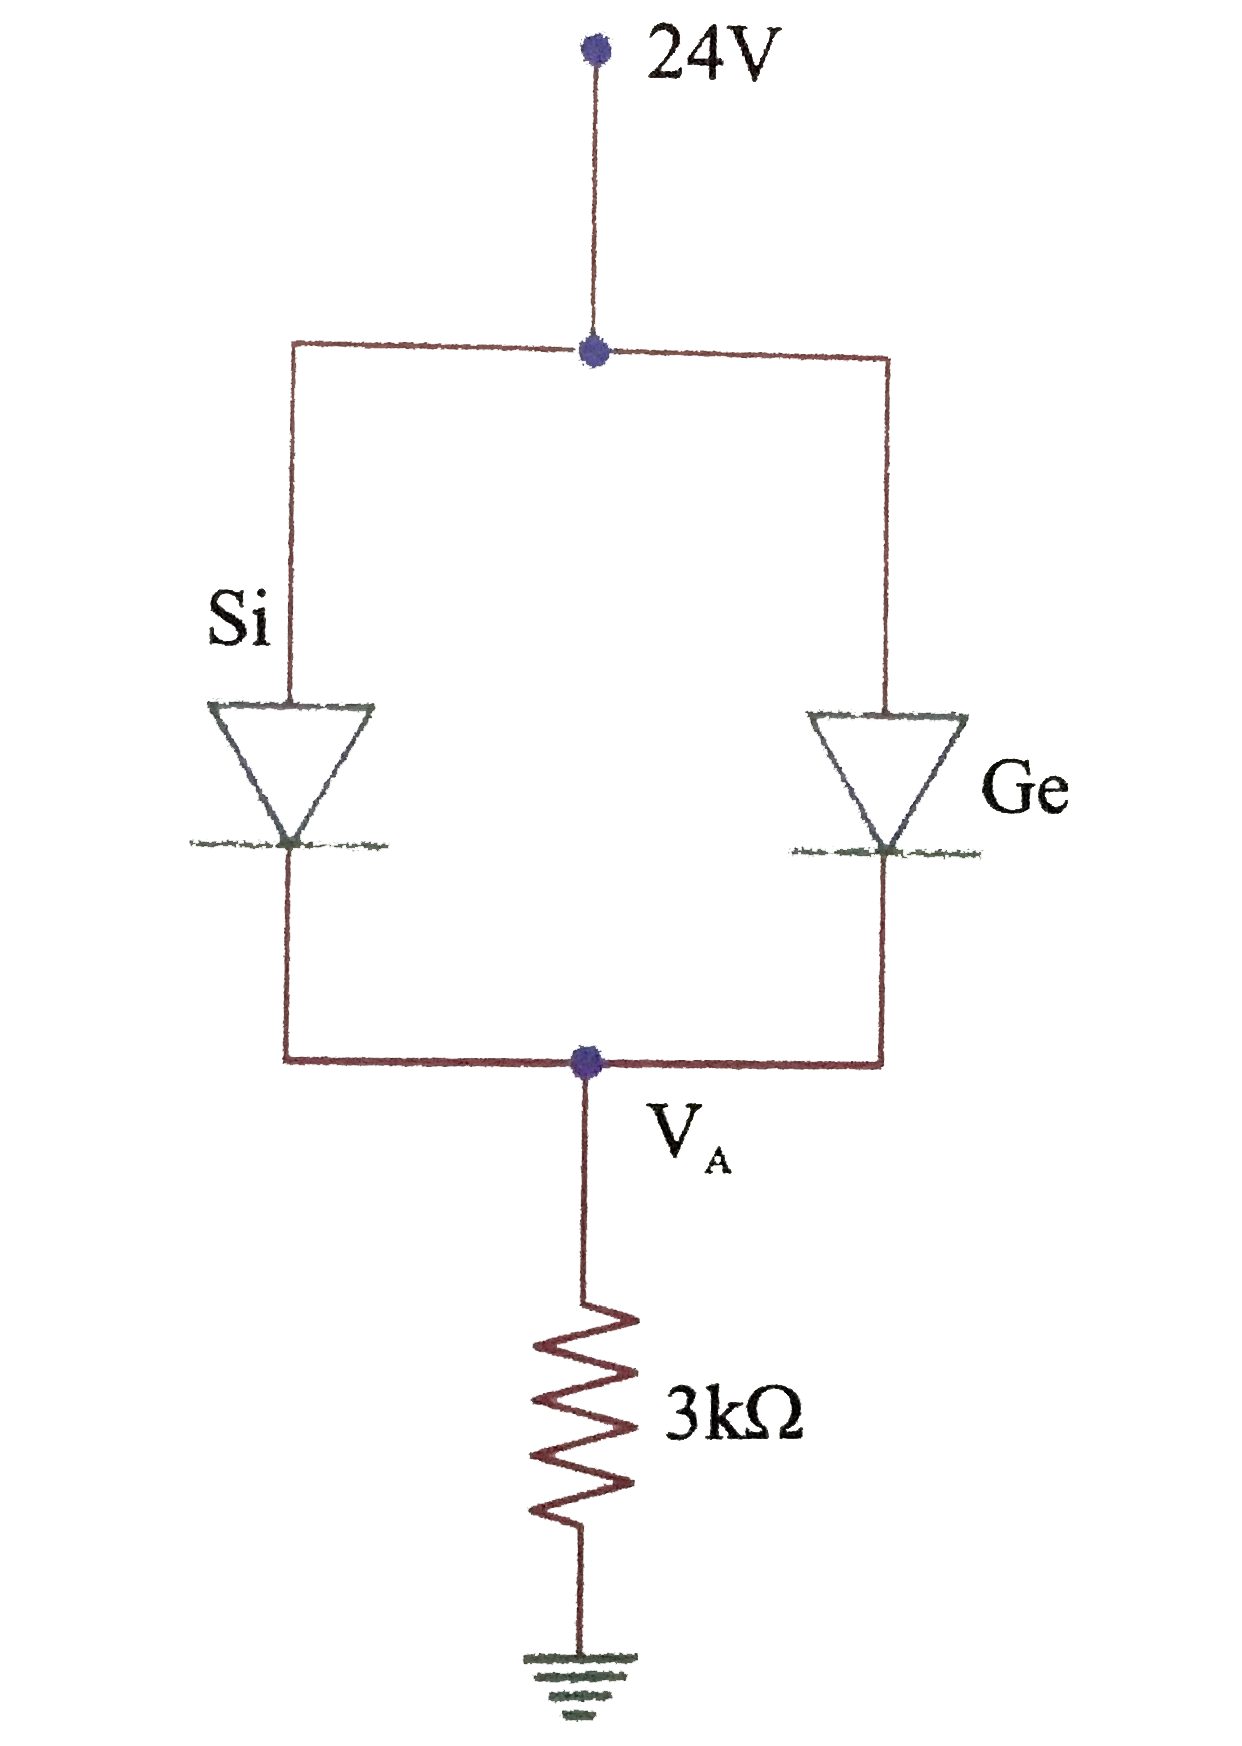 Find the voltage V(A) in the curcuit shown in figure. The potential barrier for Ge is 0.3 V and for Si is 0.7 V   .